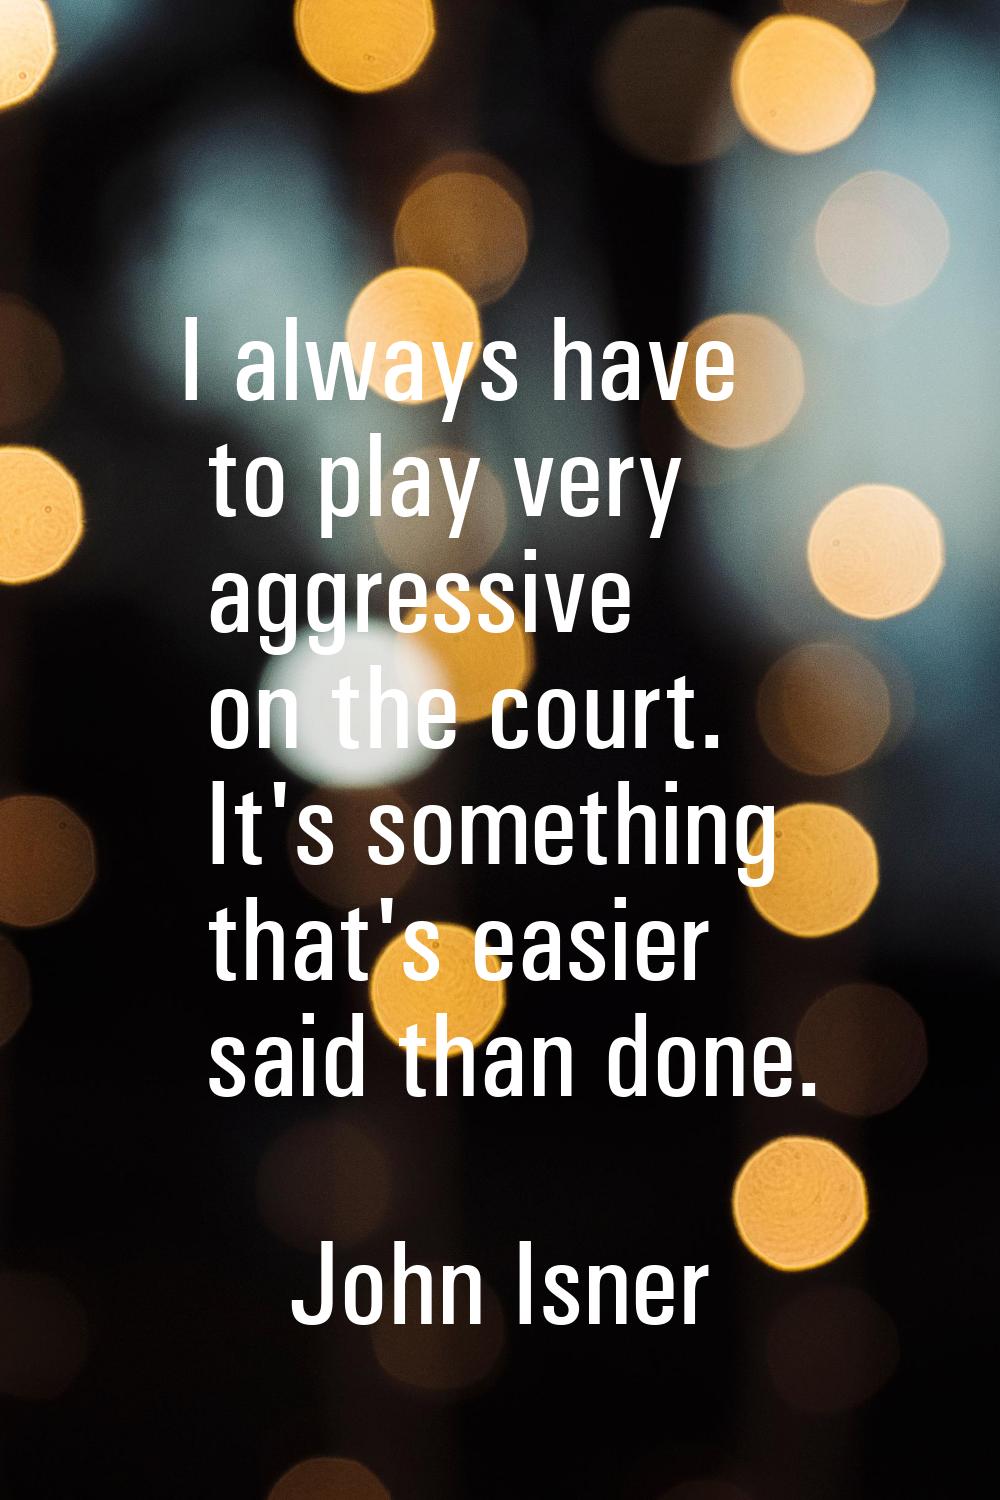 I always have to play very aggressive on the court. It's something that's easier said than done.